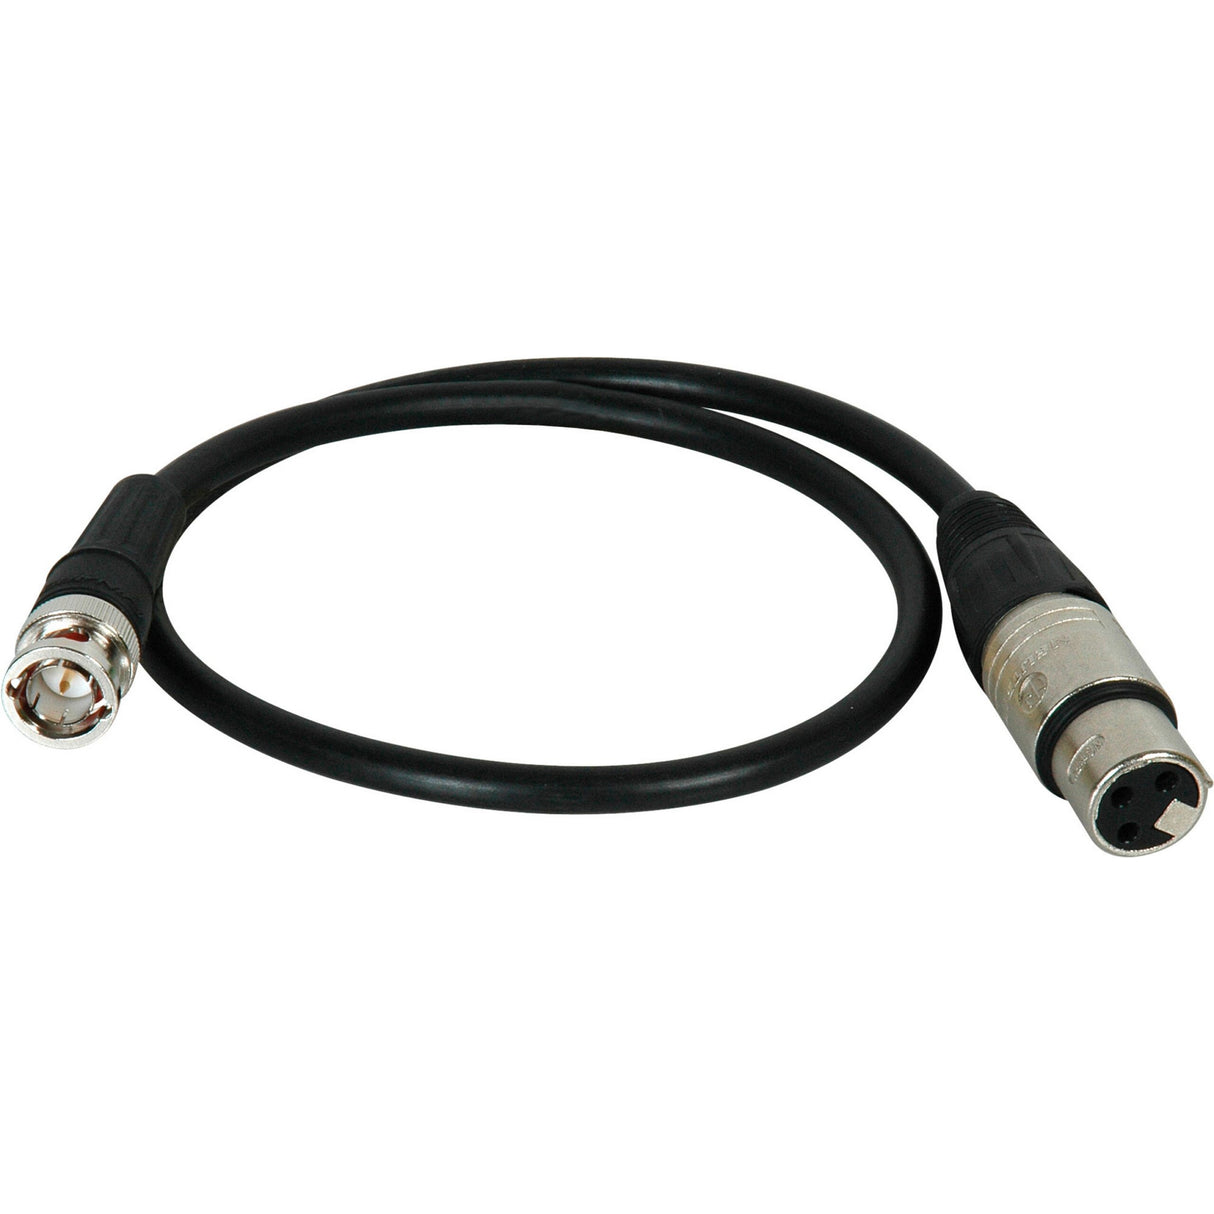 Laird XLF-B-10 Premium Quality 3-Pin XLR Female to BNC Male Timecode Cable, 1 Foot